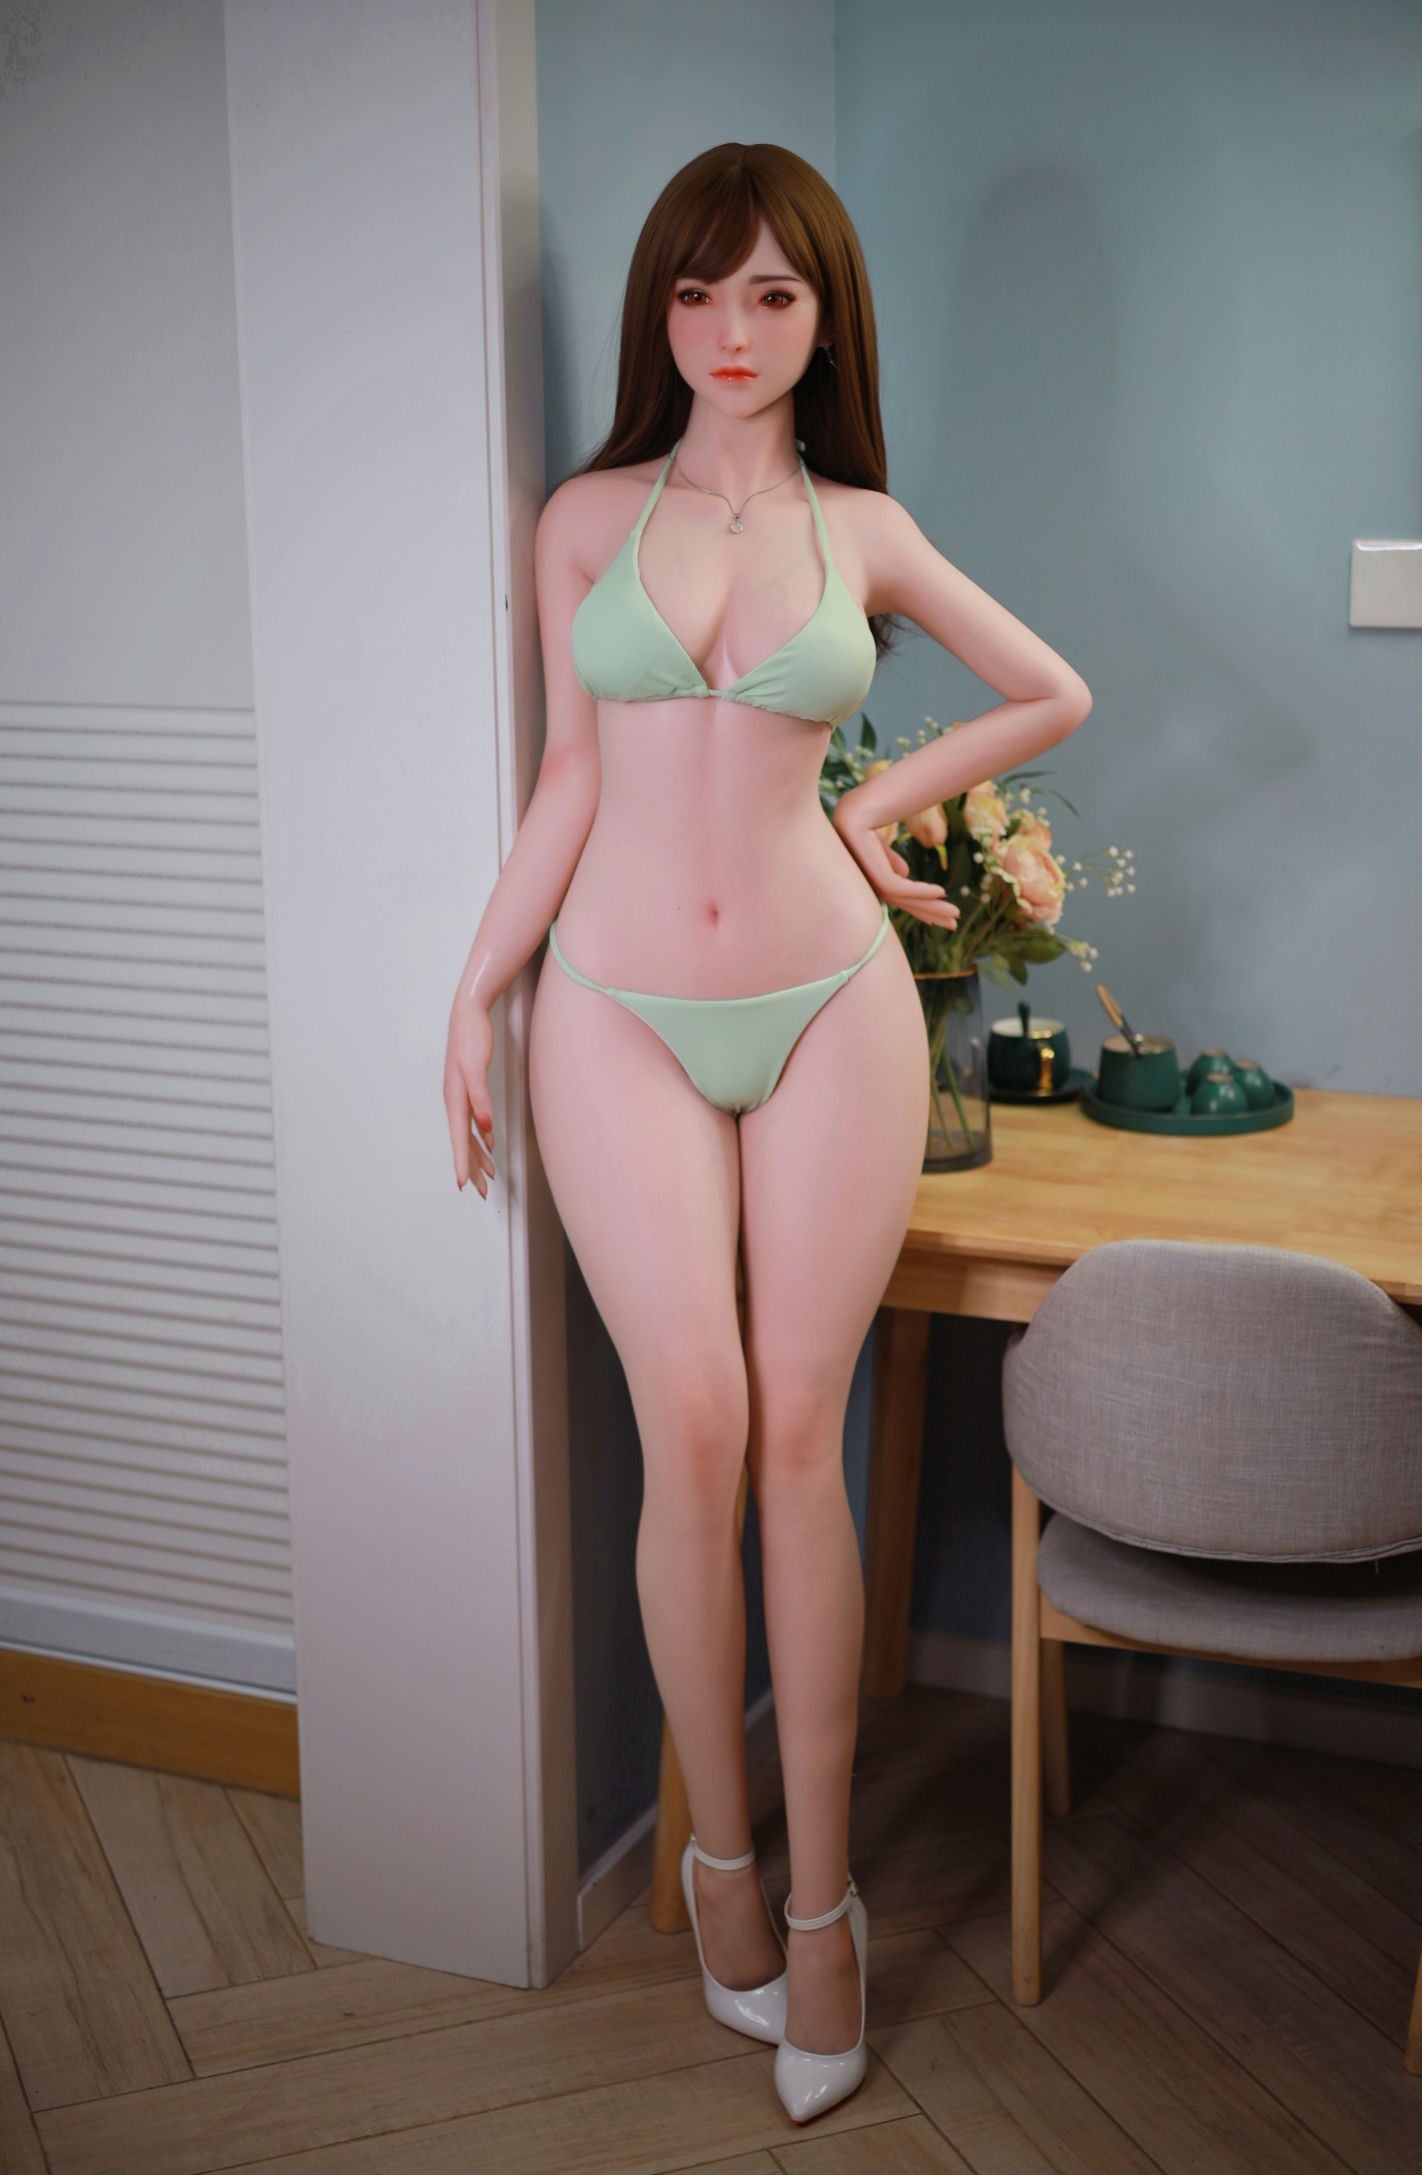 JY Doll 168cm C Cup - Peaches - Silicone